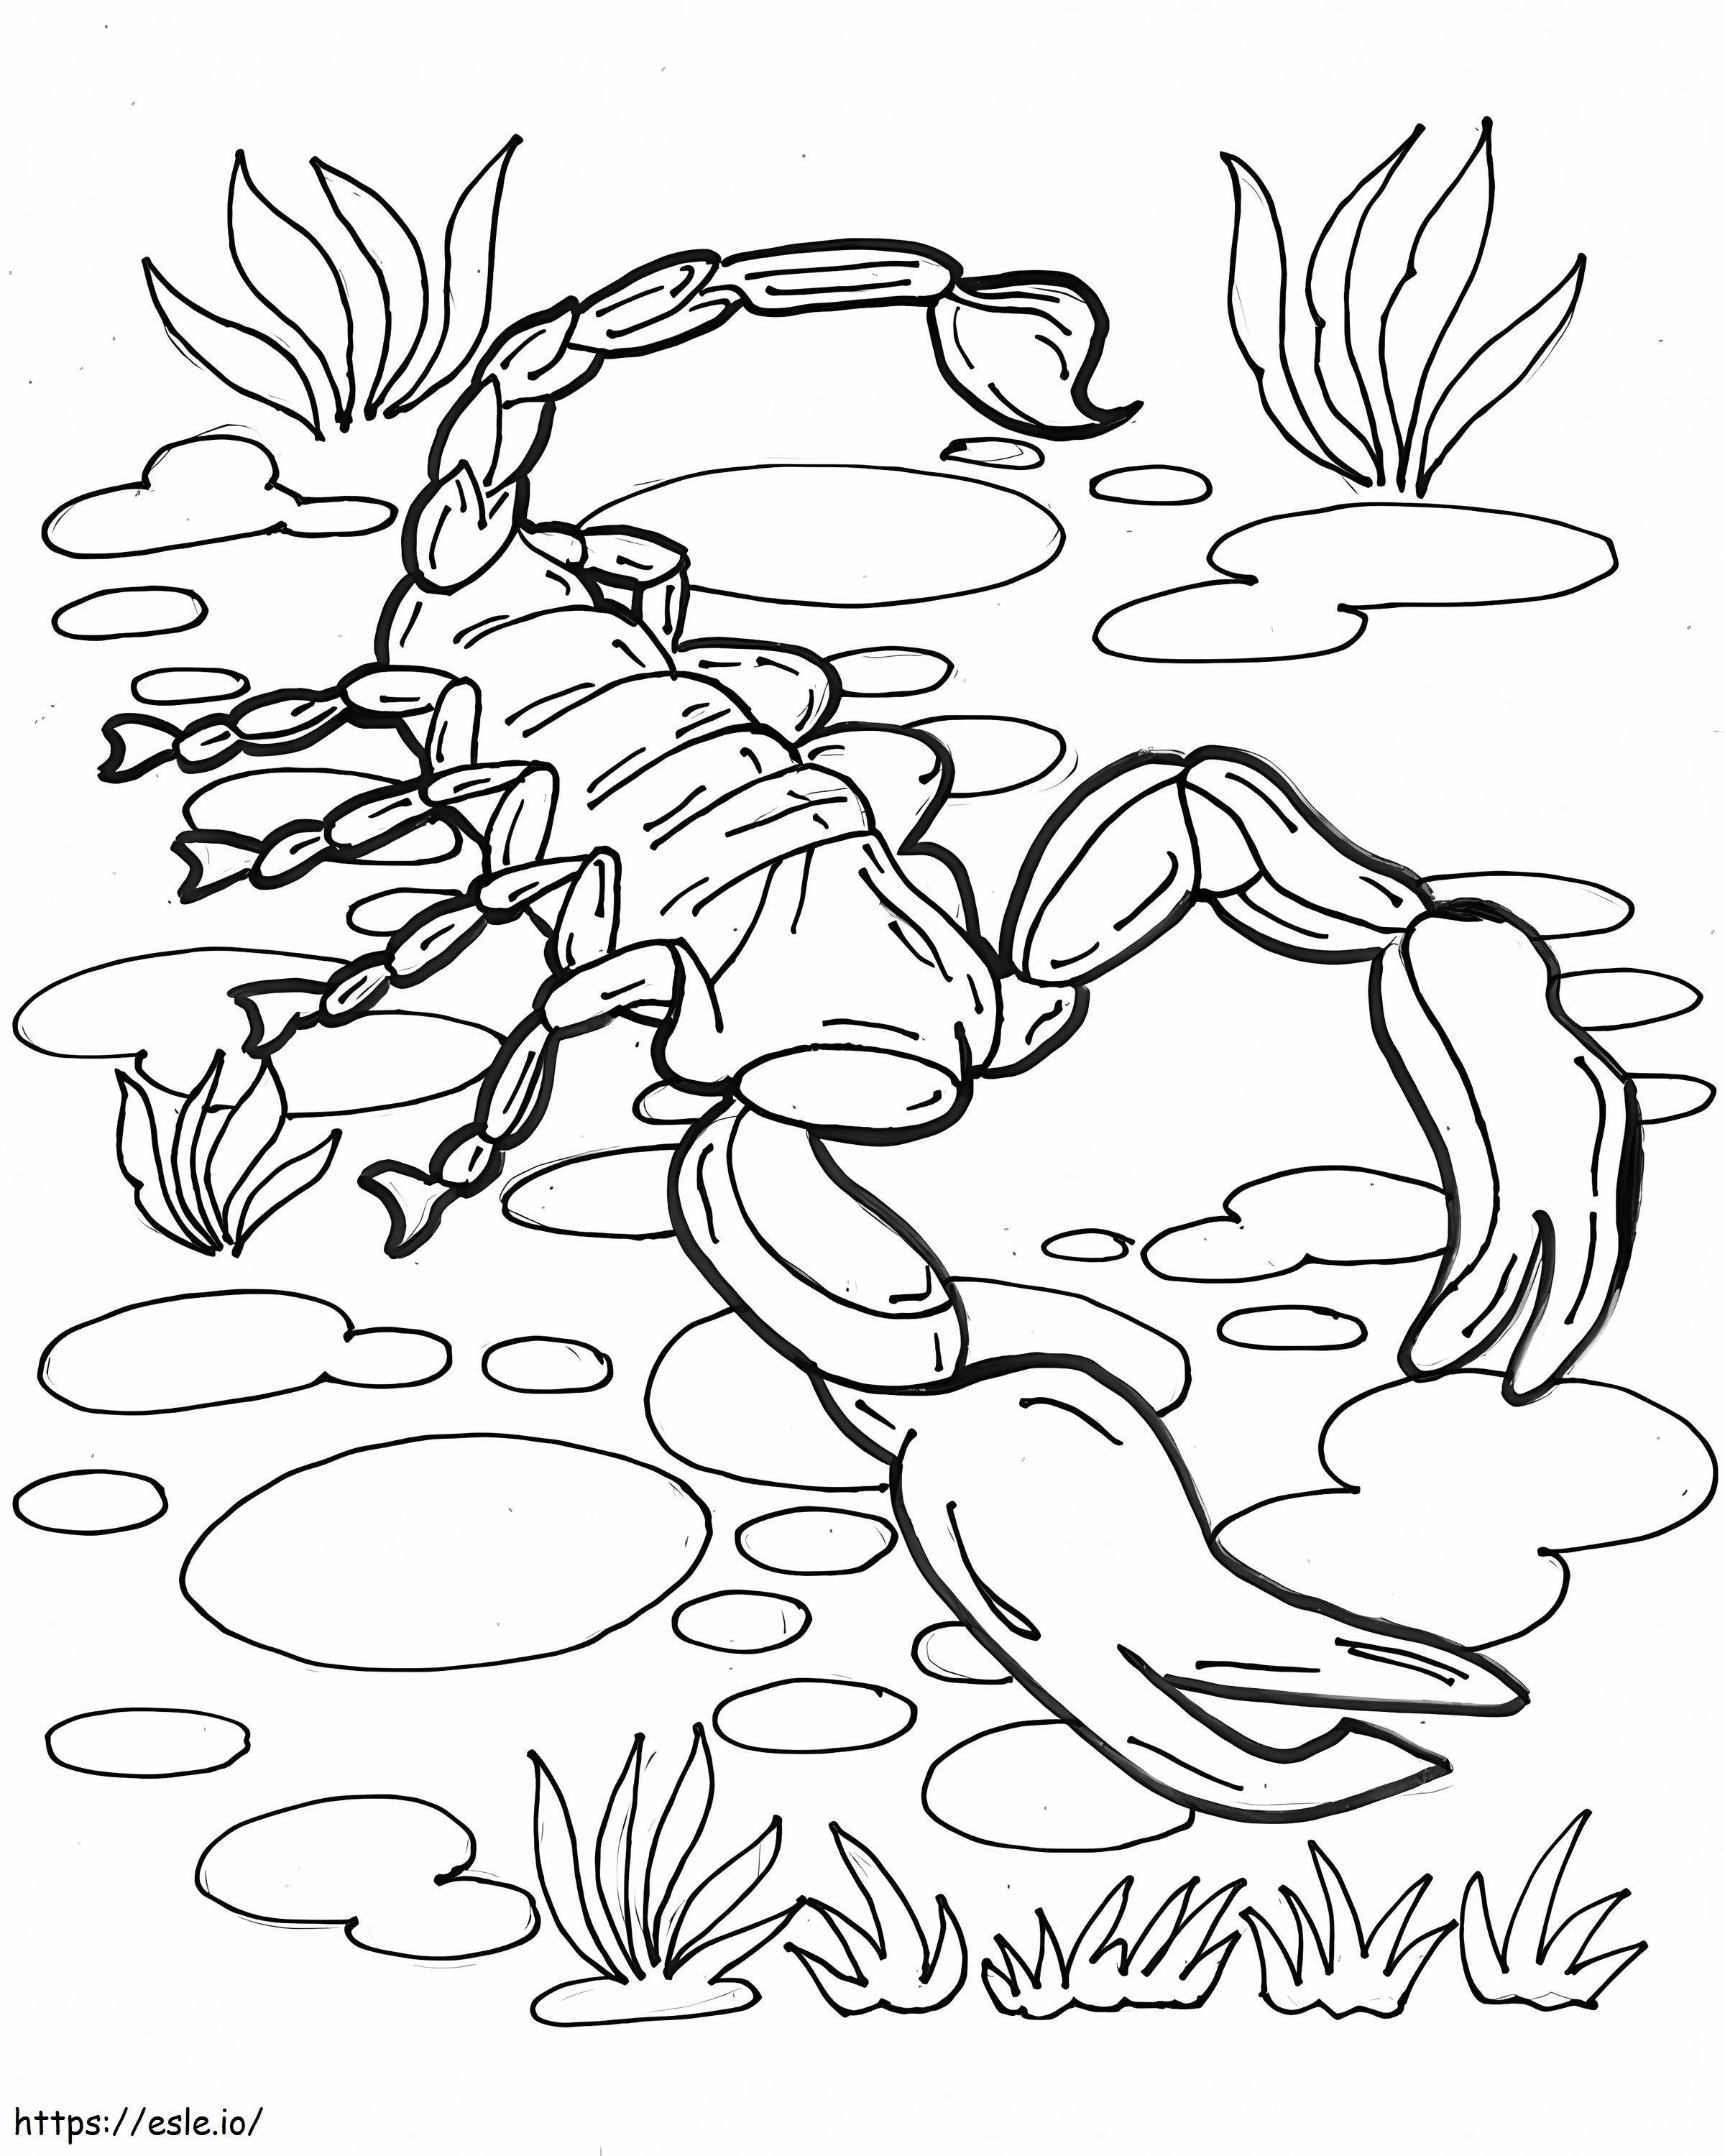 Scorpion On Ground coloring page